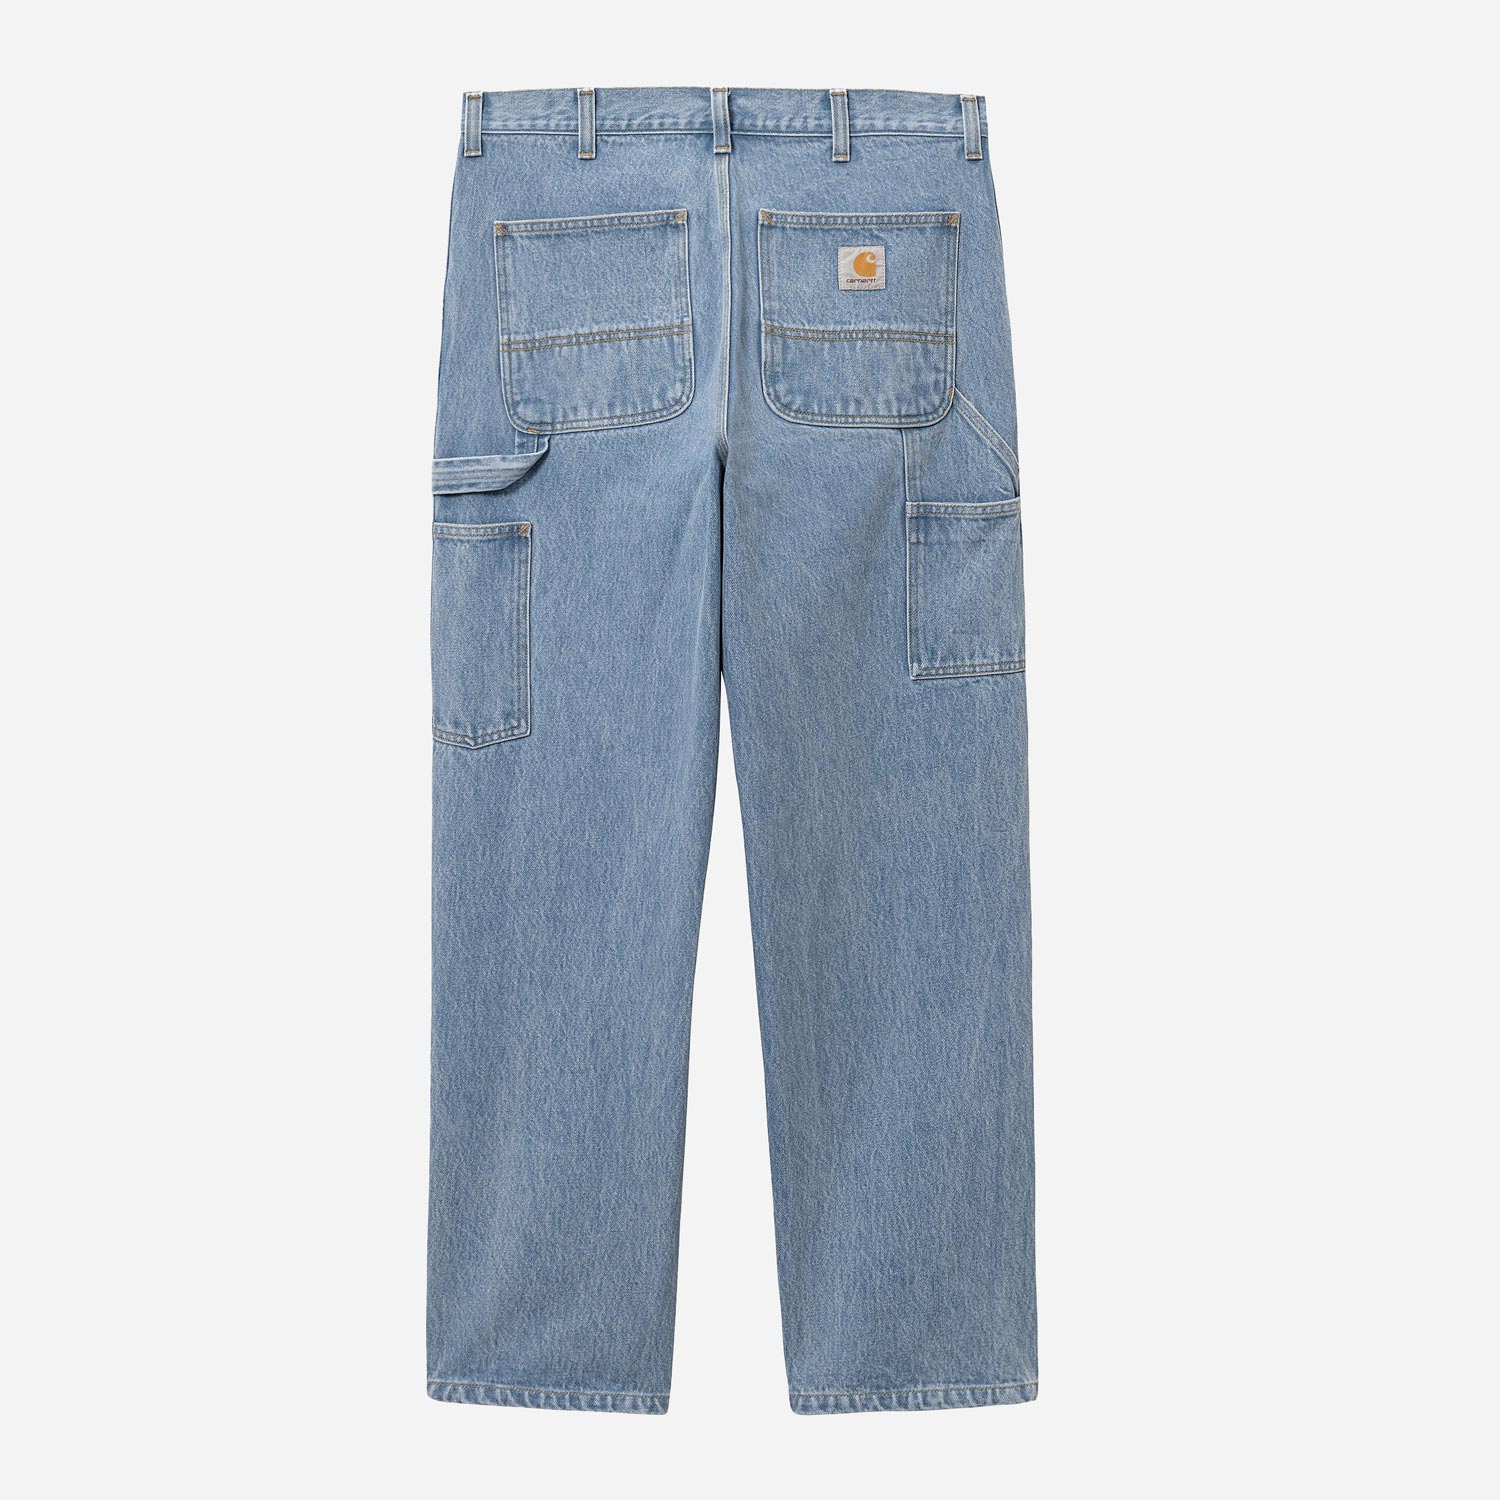 Carhartt WIP Single Knee Relaxed Fit Pant - Blue Stone Bleached